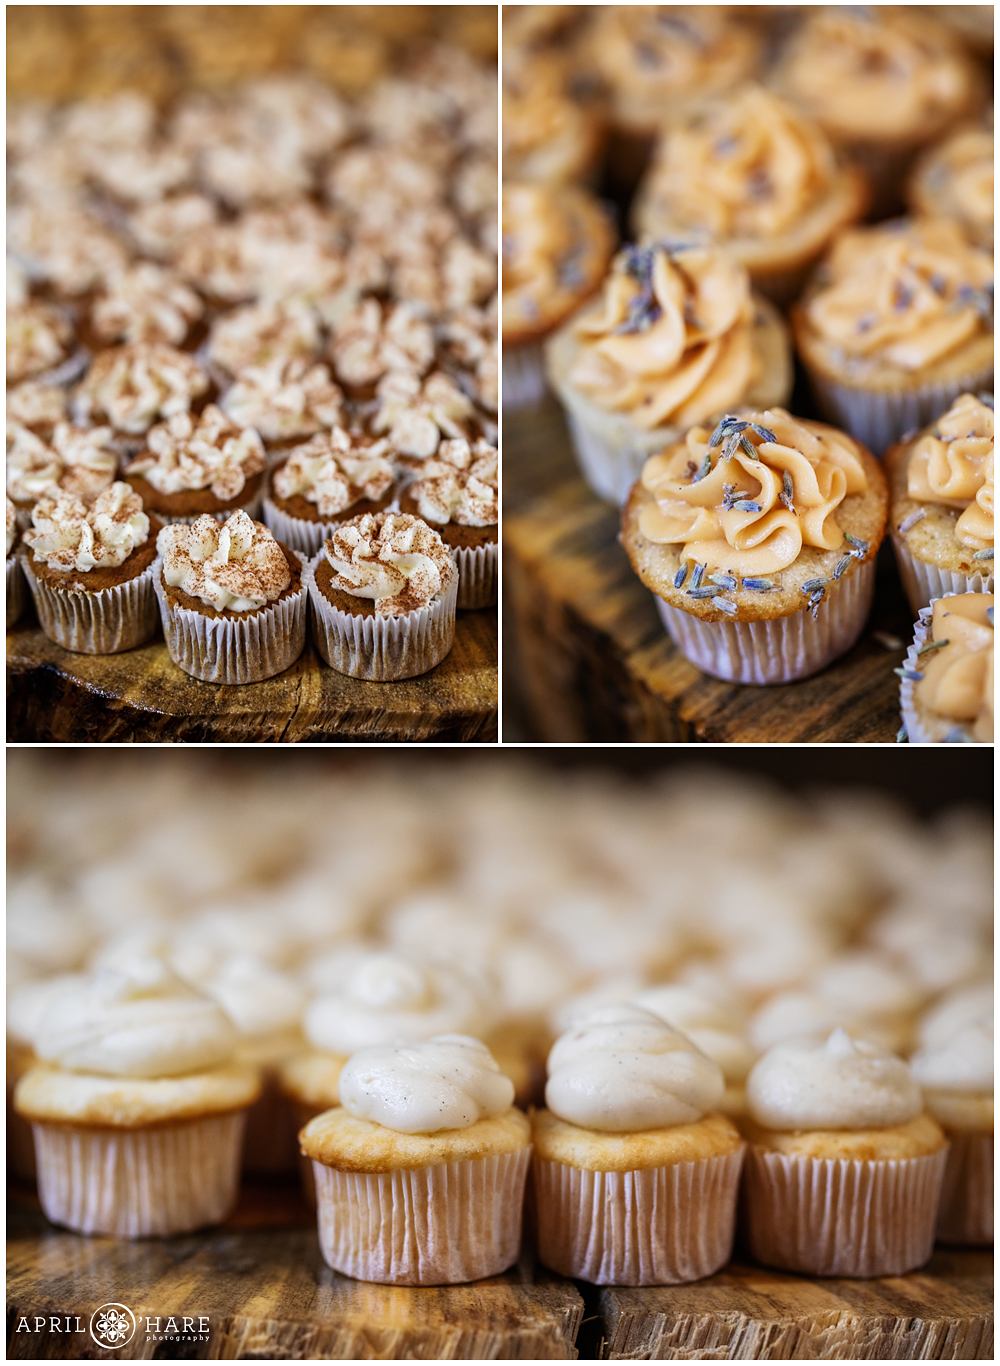 Detail photos of the mini cupcakes from a rustic wedding reception in CO